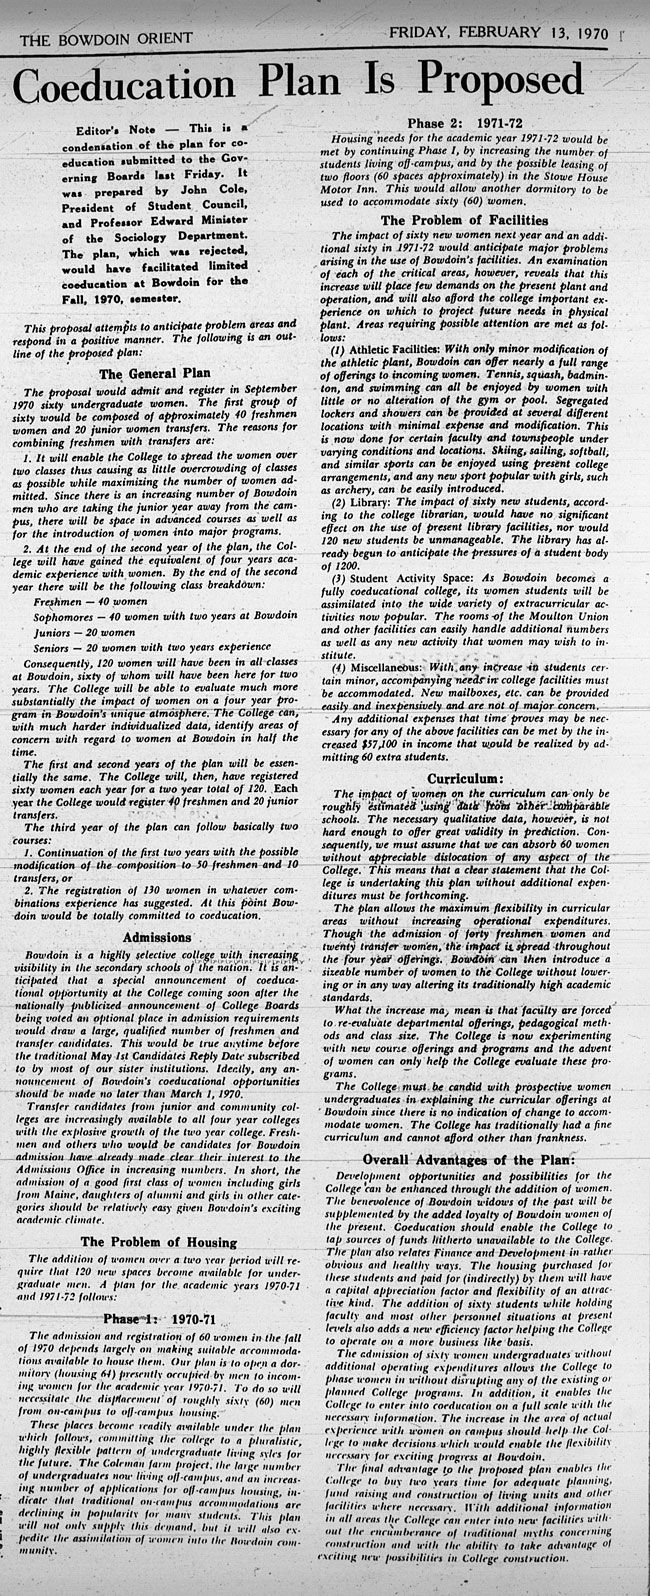 GB12 - "Coeducation Plan is Proposed" The Bowdoin Orient February 13, 1970